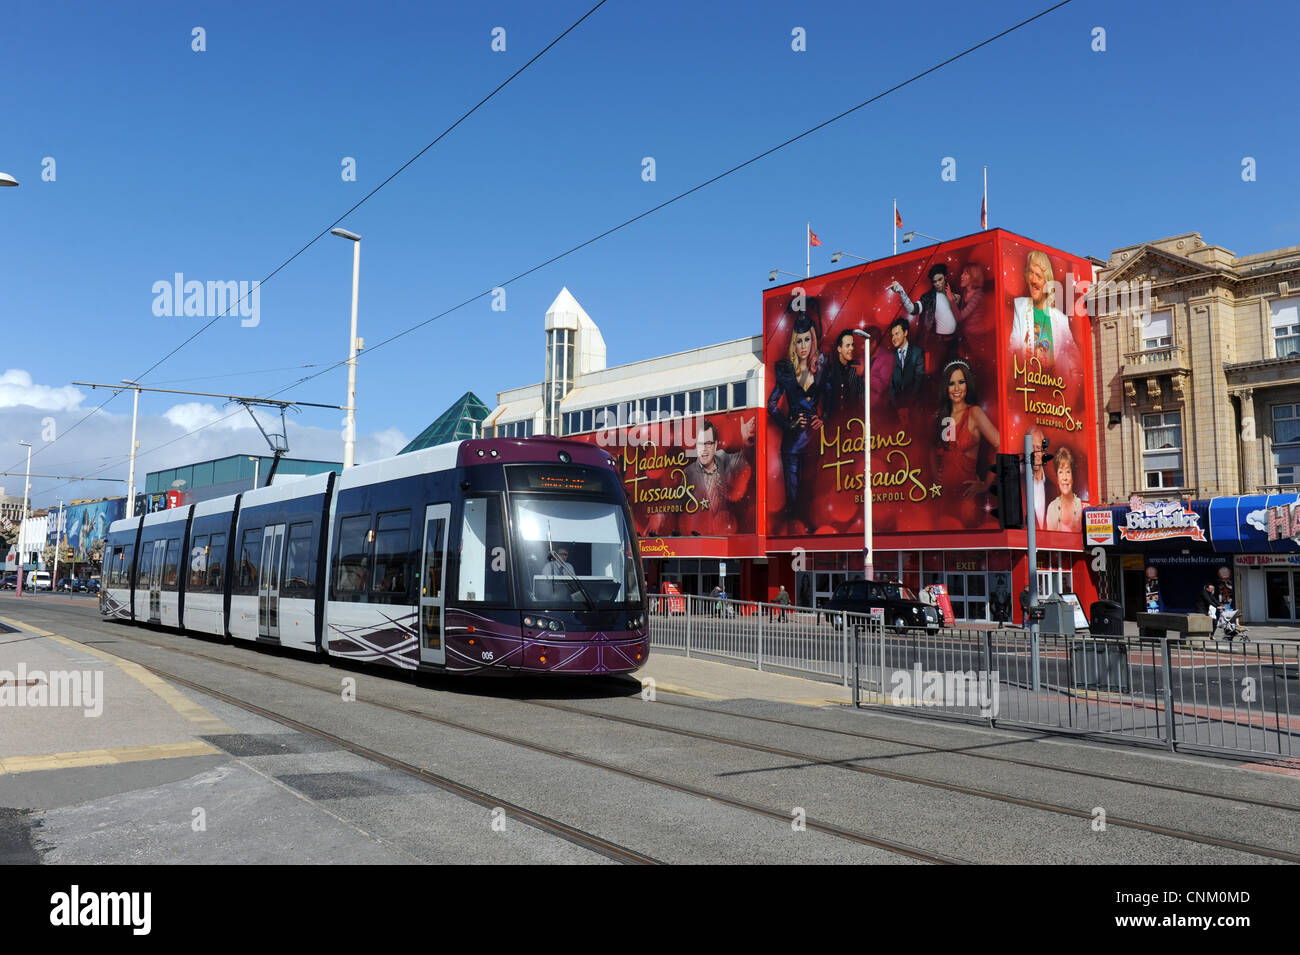 A new Blackpool tram at Central Pier Station in Blackpool Uk the new Bombardier trams went into service April 2012 Stock Photo